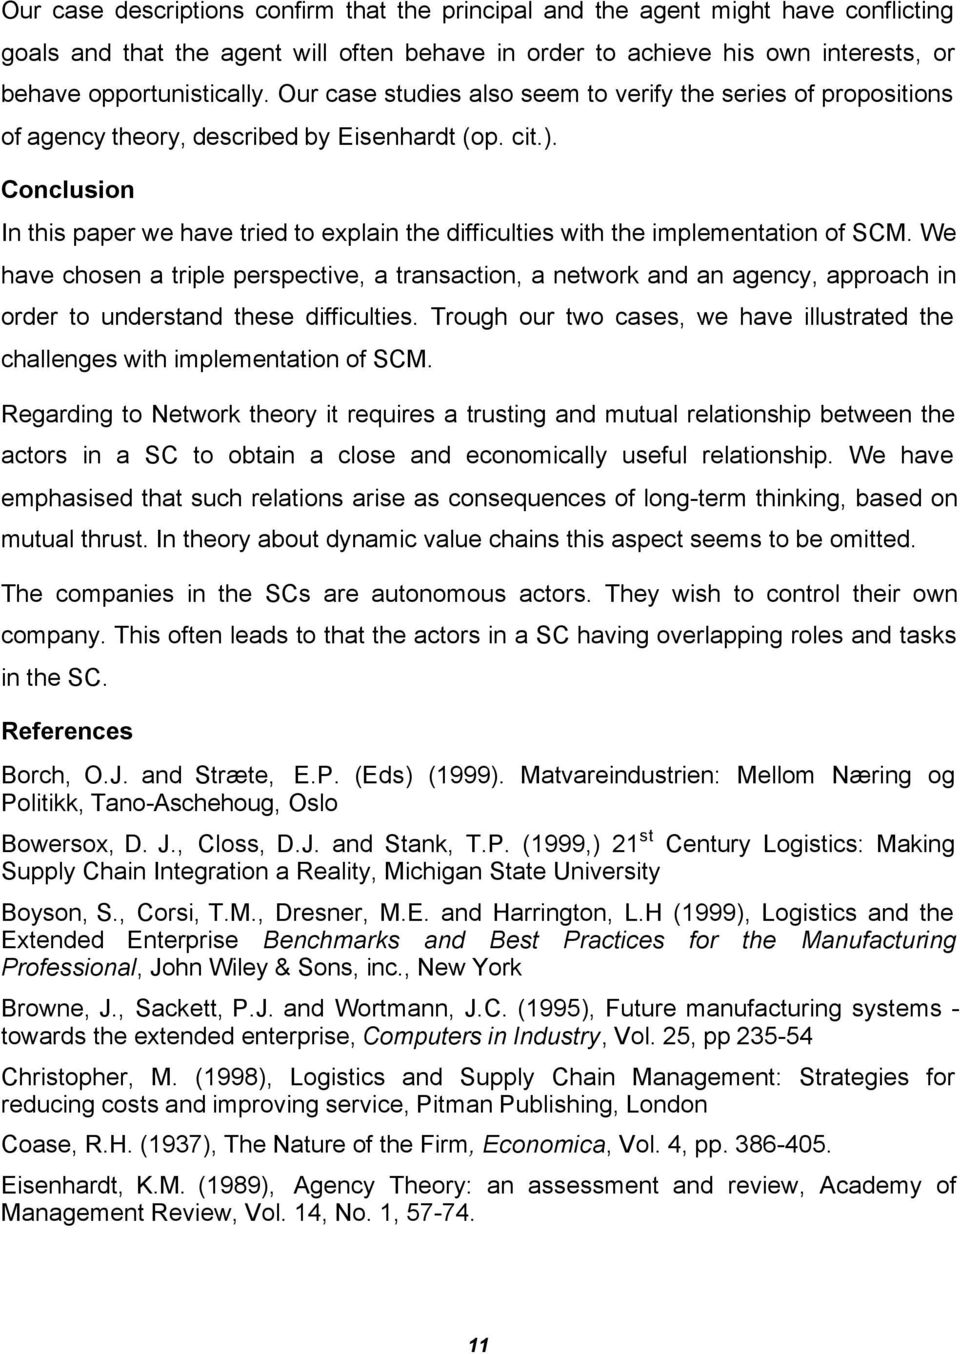 Conclusion In this paper we have tried to explain the difficulties with the implementation of SCM.